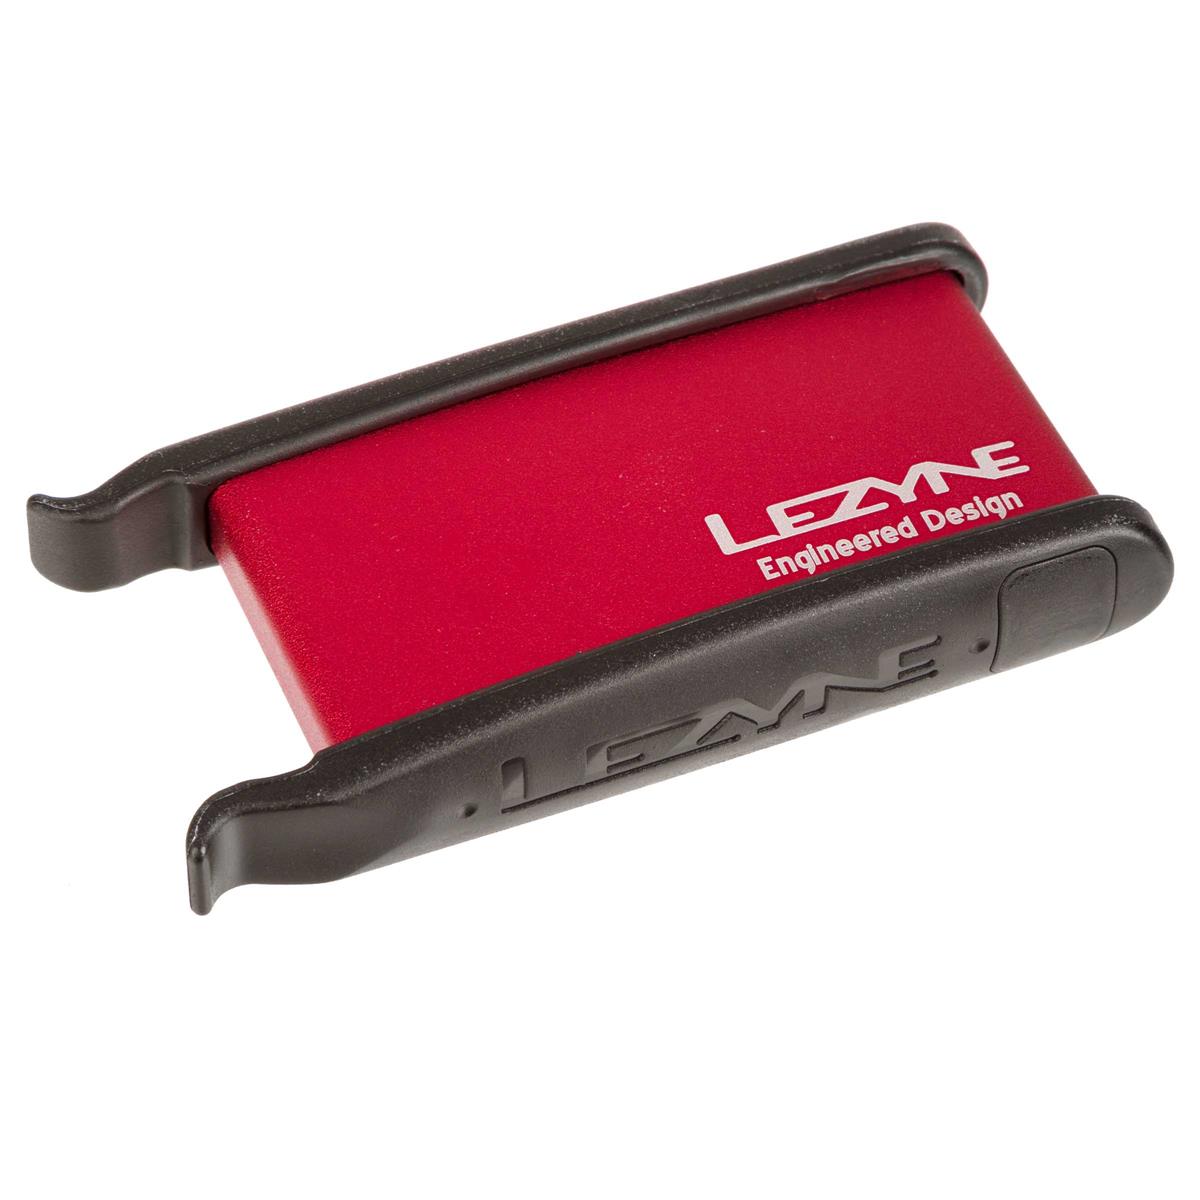 Lezyne Tire Lever Kit Lever Kit with Repairkit, Red